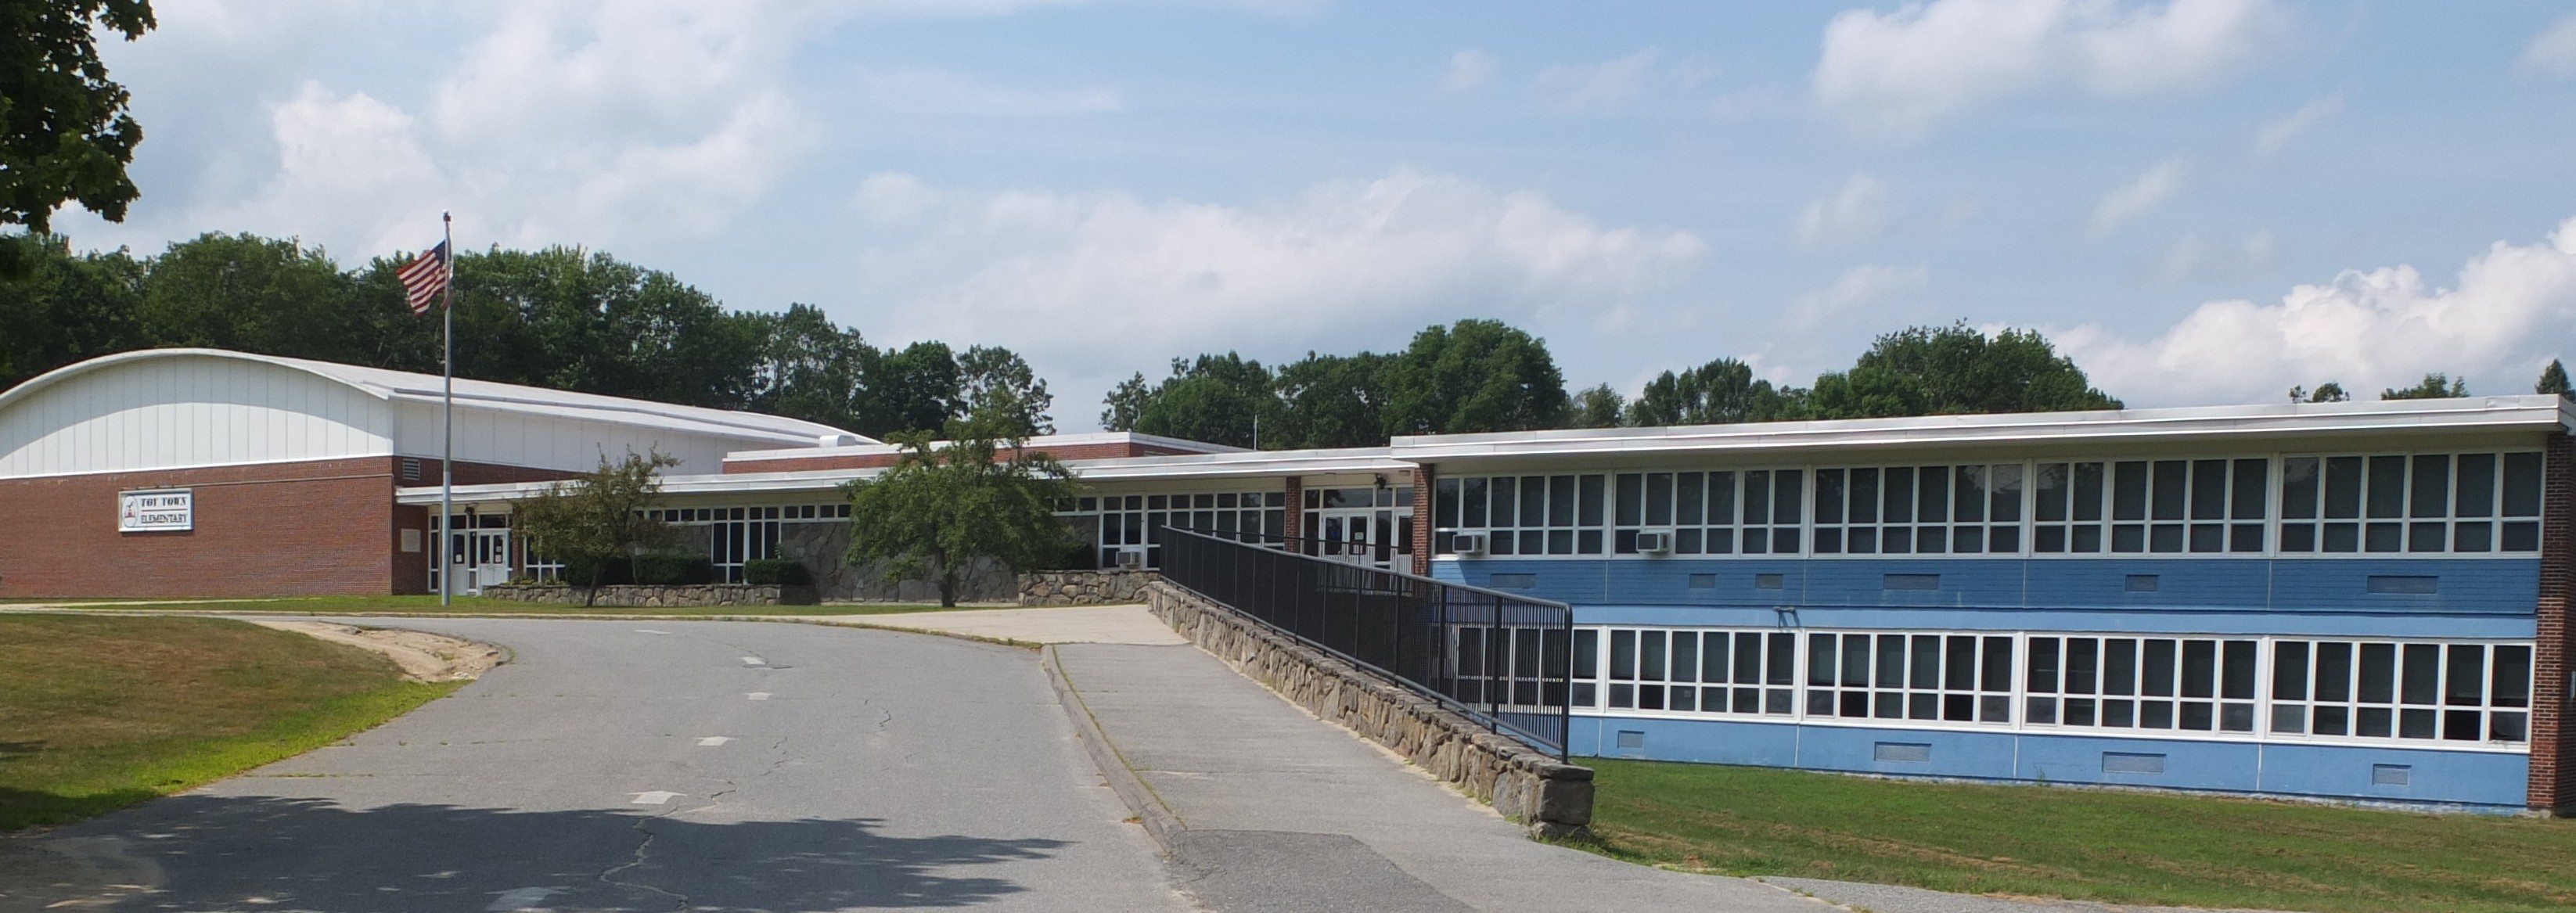 Toy Town Elementary School Building